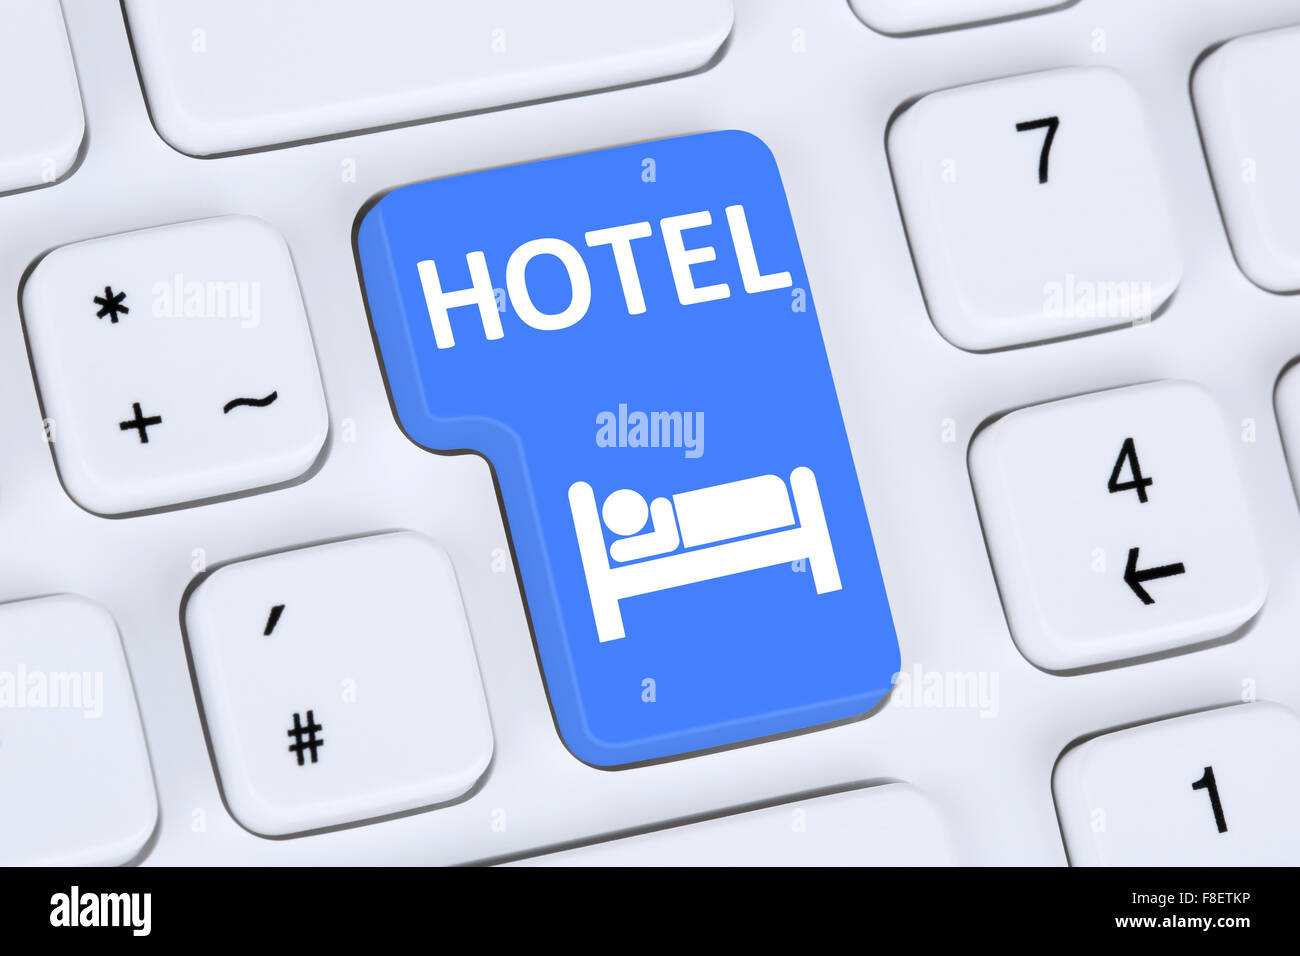 Hotel room stay online internet booking computer concept Stock Photo